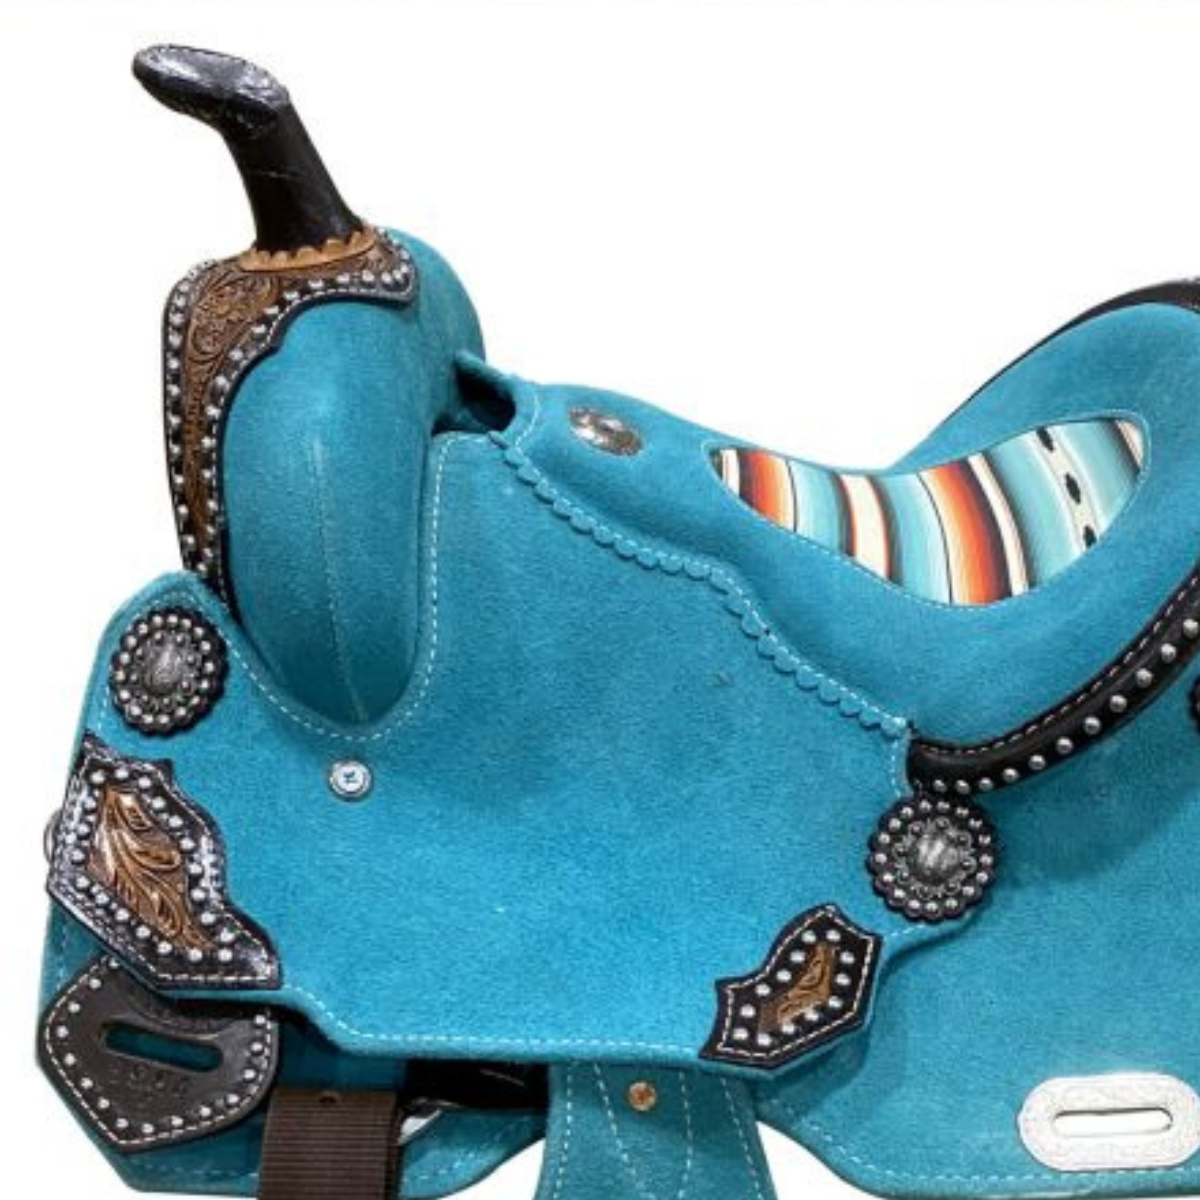 13" DOUBLE T TEAL ROUGH OUT BARREL STYLE SADDLE WITH SOUTHWEST PRINTED INLAY - Double T Saddles